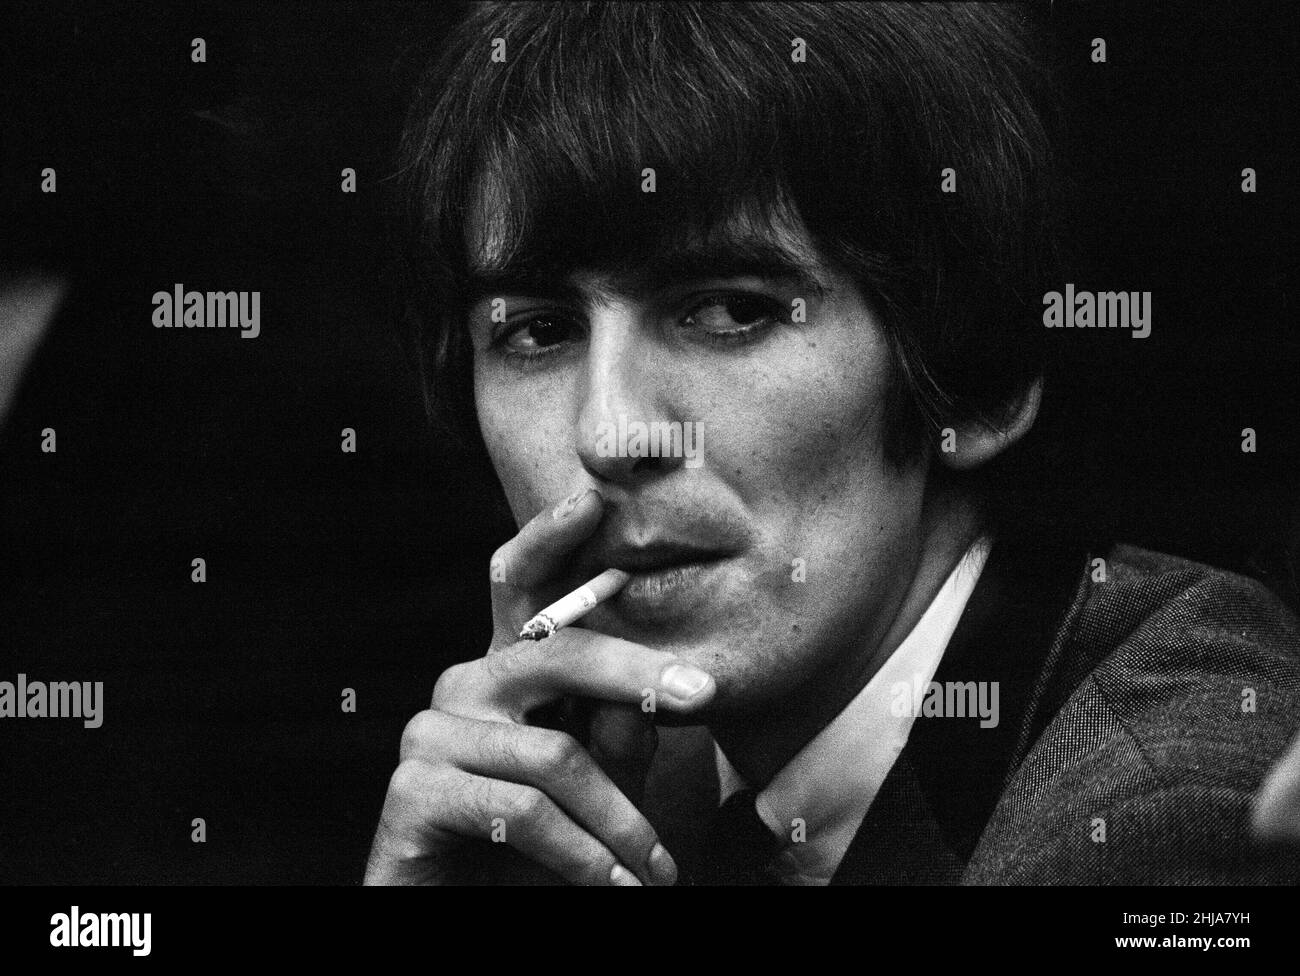 The Beatles Summer 1964 Tour of the United States and Canada.The band flew out from Heathrow Airport for San Francisco International on the 18th August, briefly stopping at Los Angeles airport en route. Pictured is Beatles guitarist George Harrison smoking a cigarette during a press conference in Atlantic City, New Jersey. 30th August 1964.       GH2001 Stock Photo